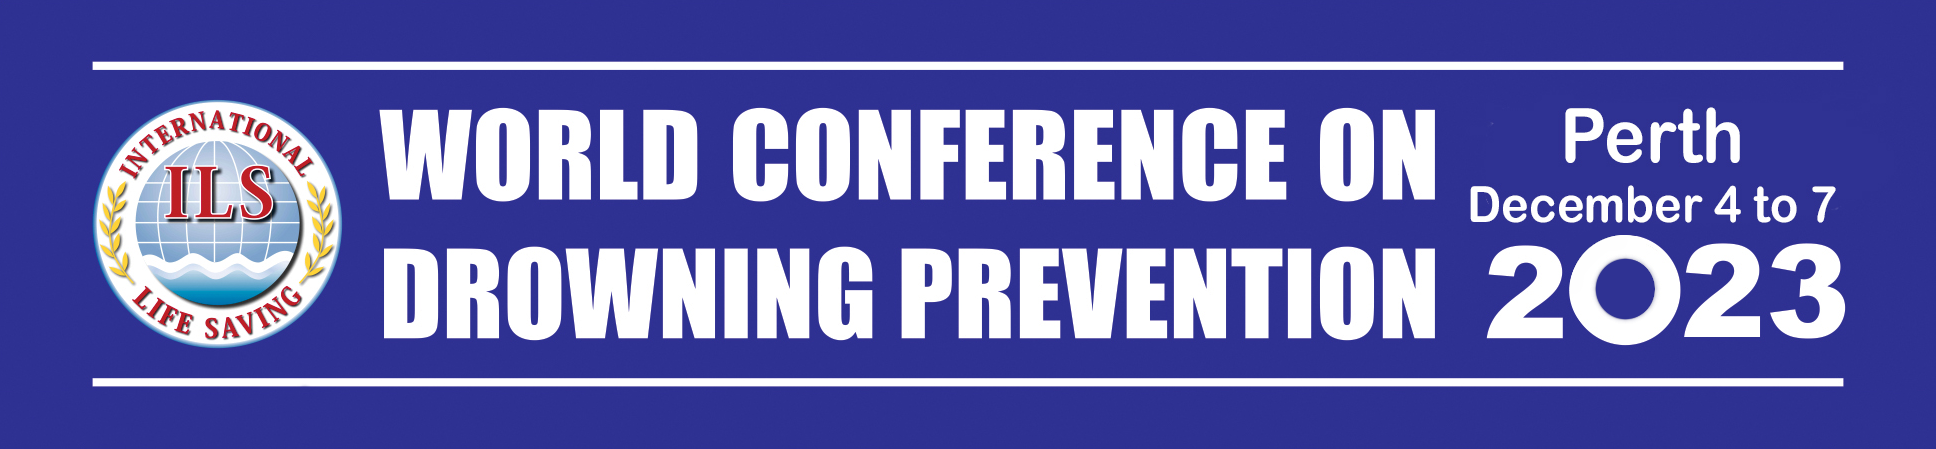 WCDP2023 – World Conference on Drowning Prevention 2023